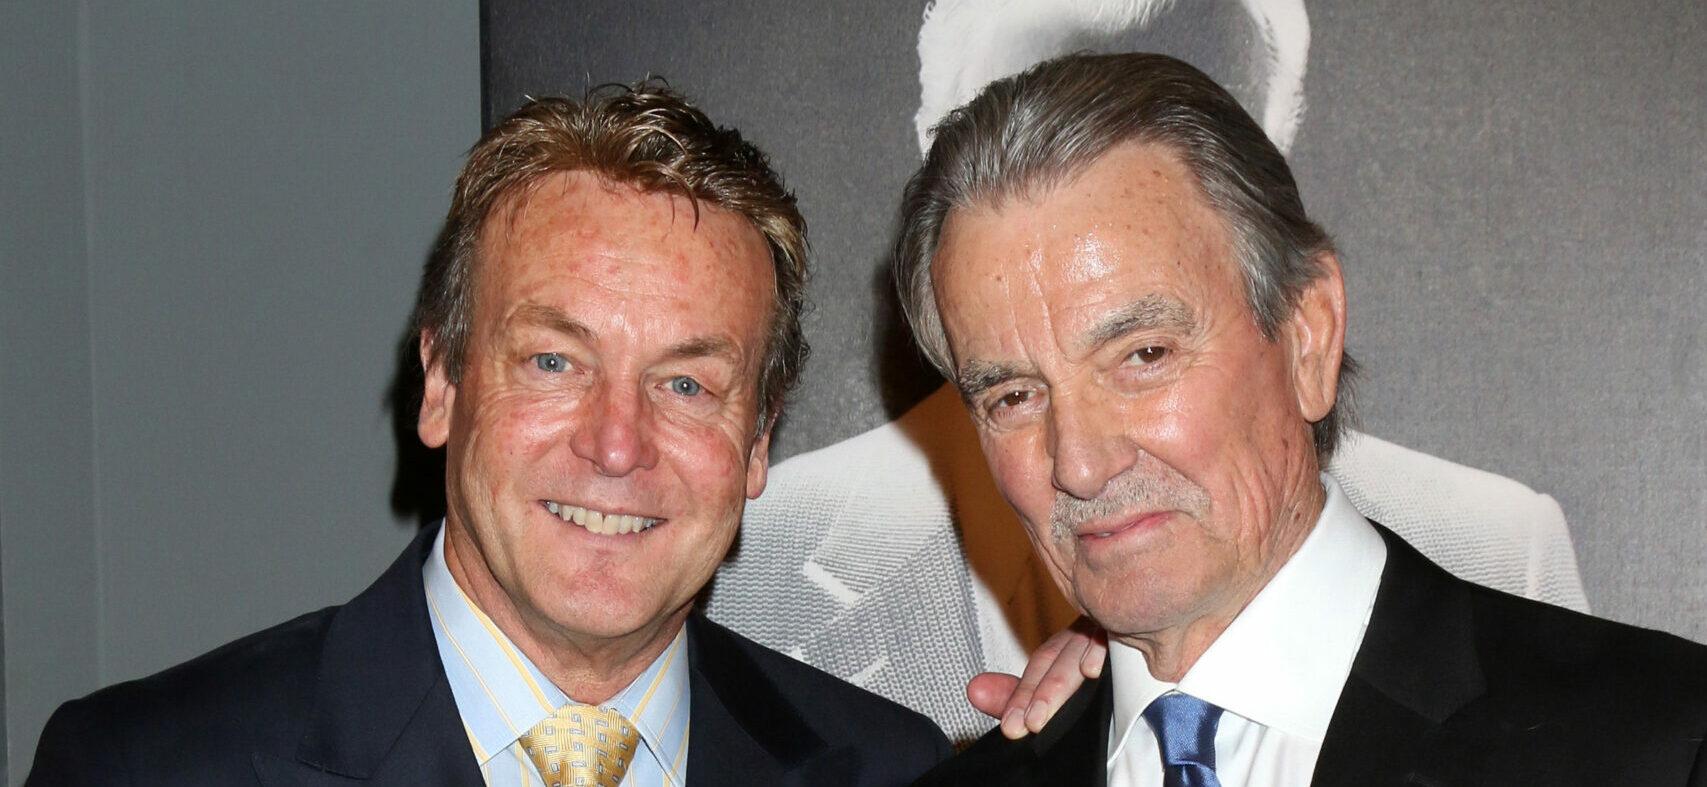 LOS ANGELES - FEB 7: Doug Davidson and Eric Braeden at the Eric Braeden 40th Anniversary Celebration on The Young and The Restless at the Television City on February 7, 2020 in Los Angeles, CA